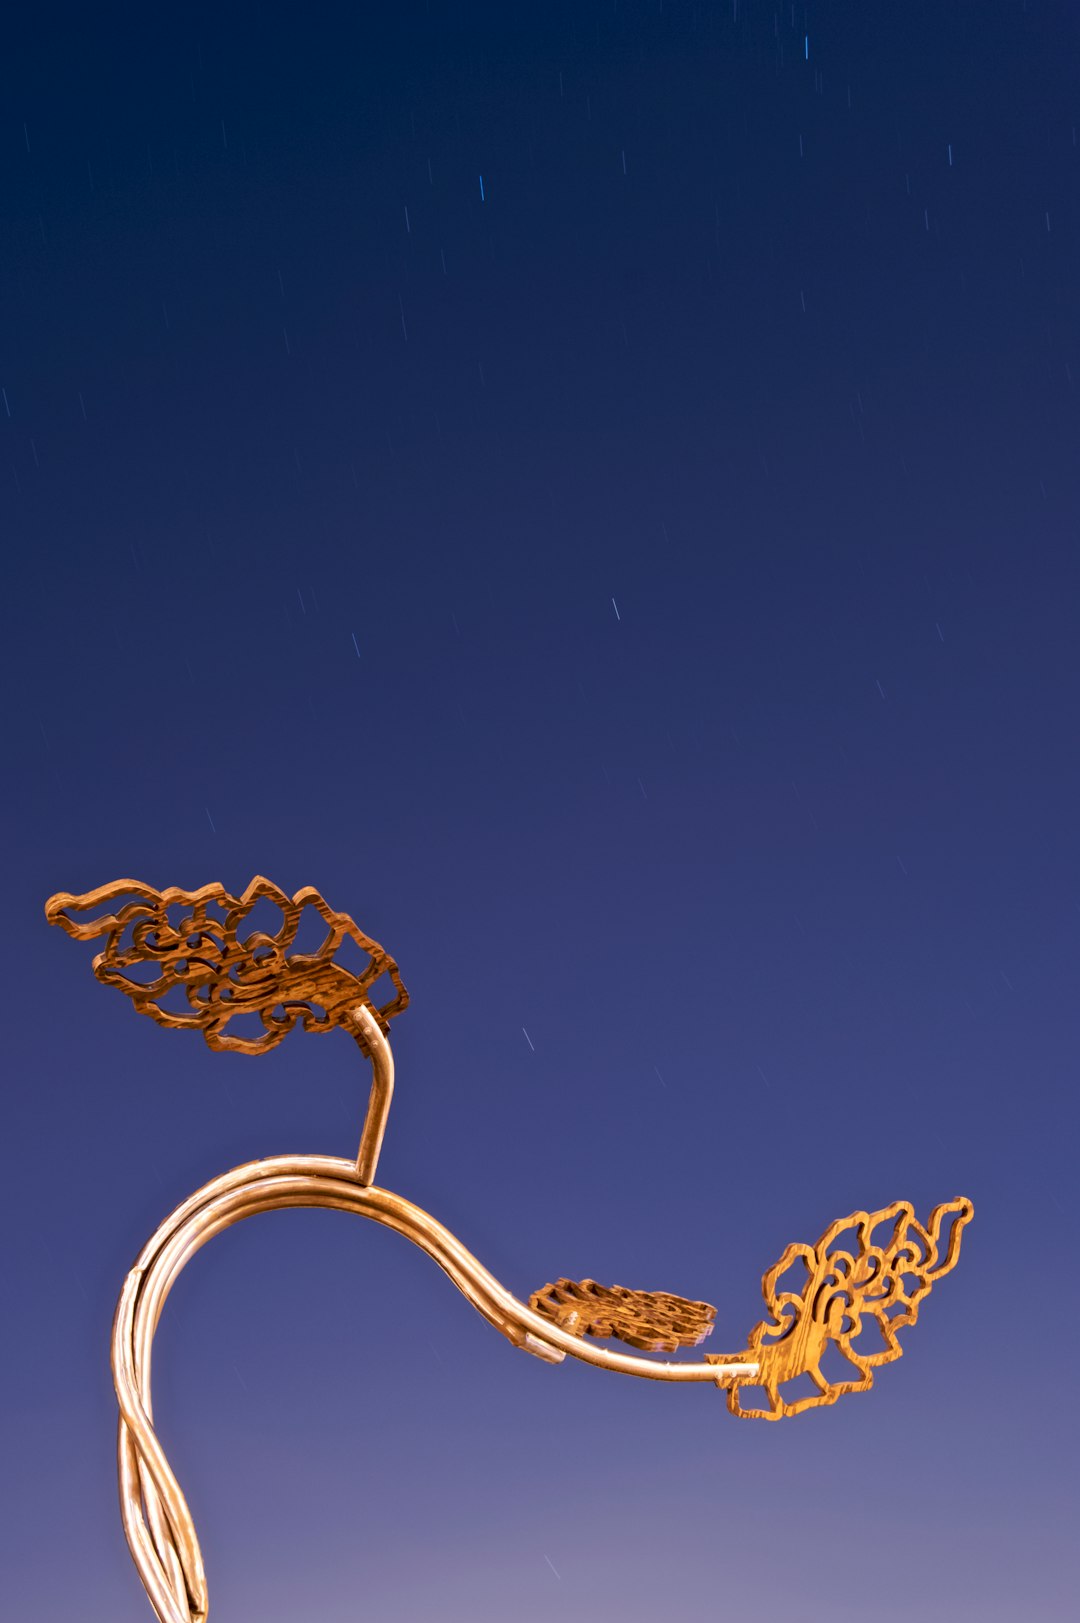 a medal tree built and shown in san diego